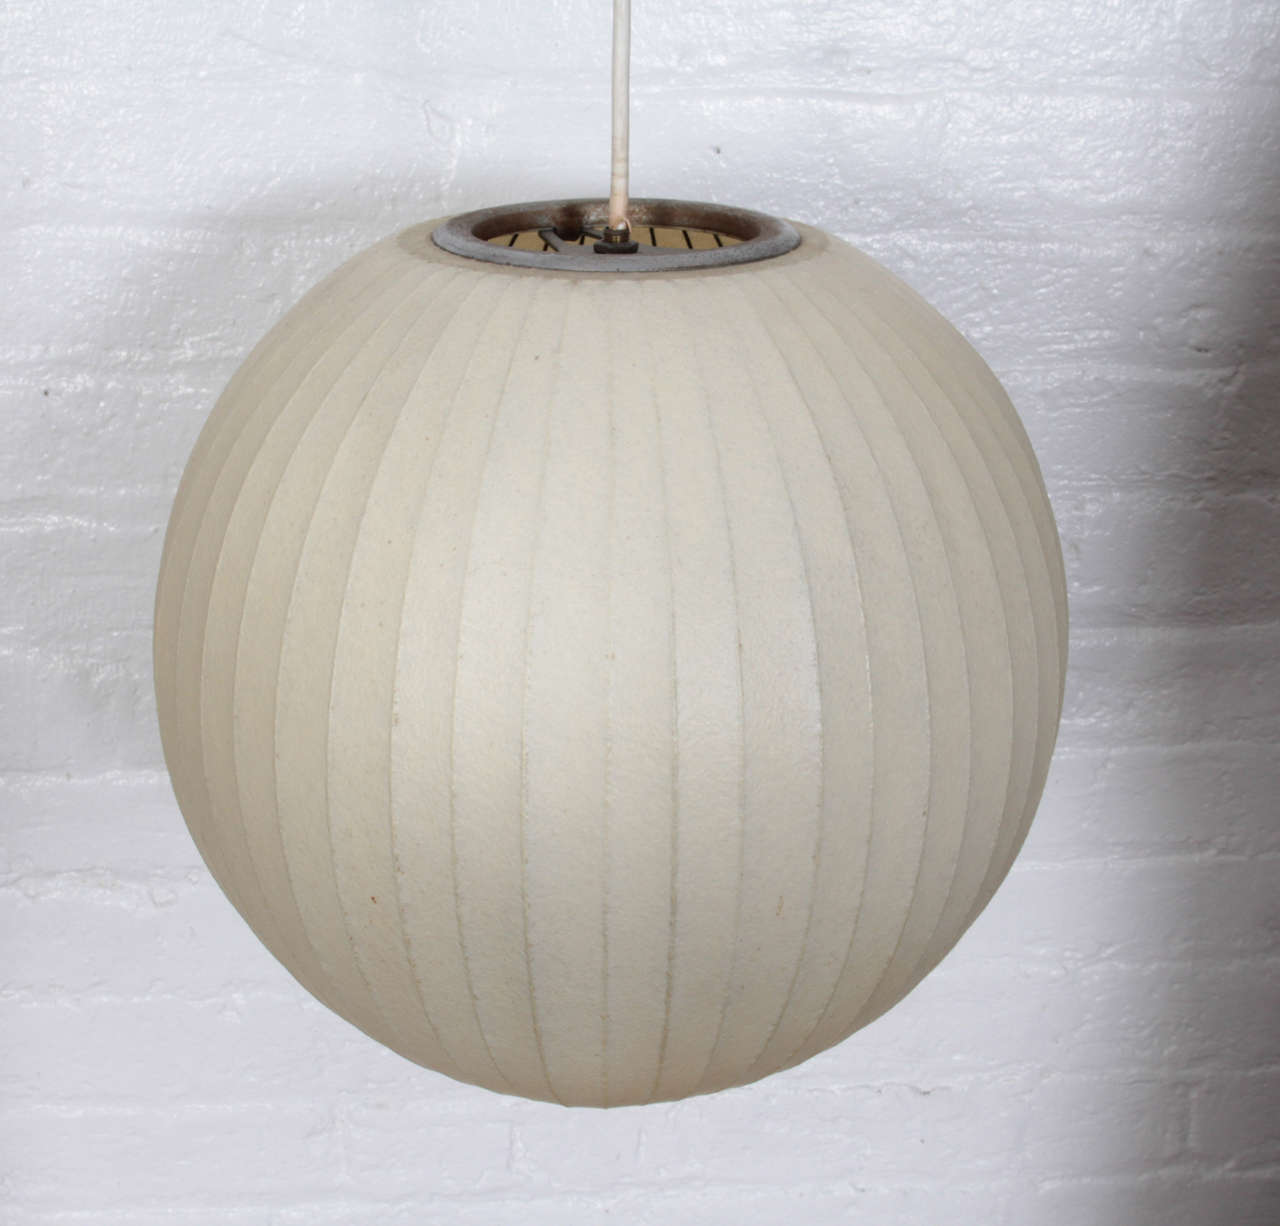 George Nelson fiberglass bubble lamp, medium round, 1950s. Manufactured by Howard Miller.